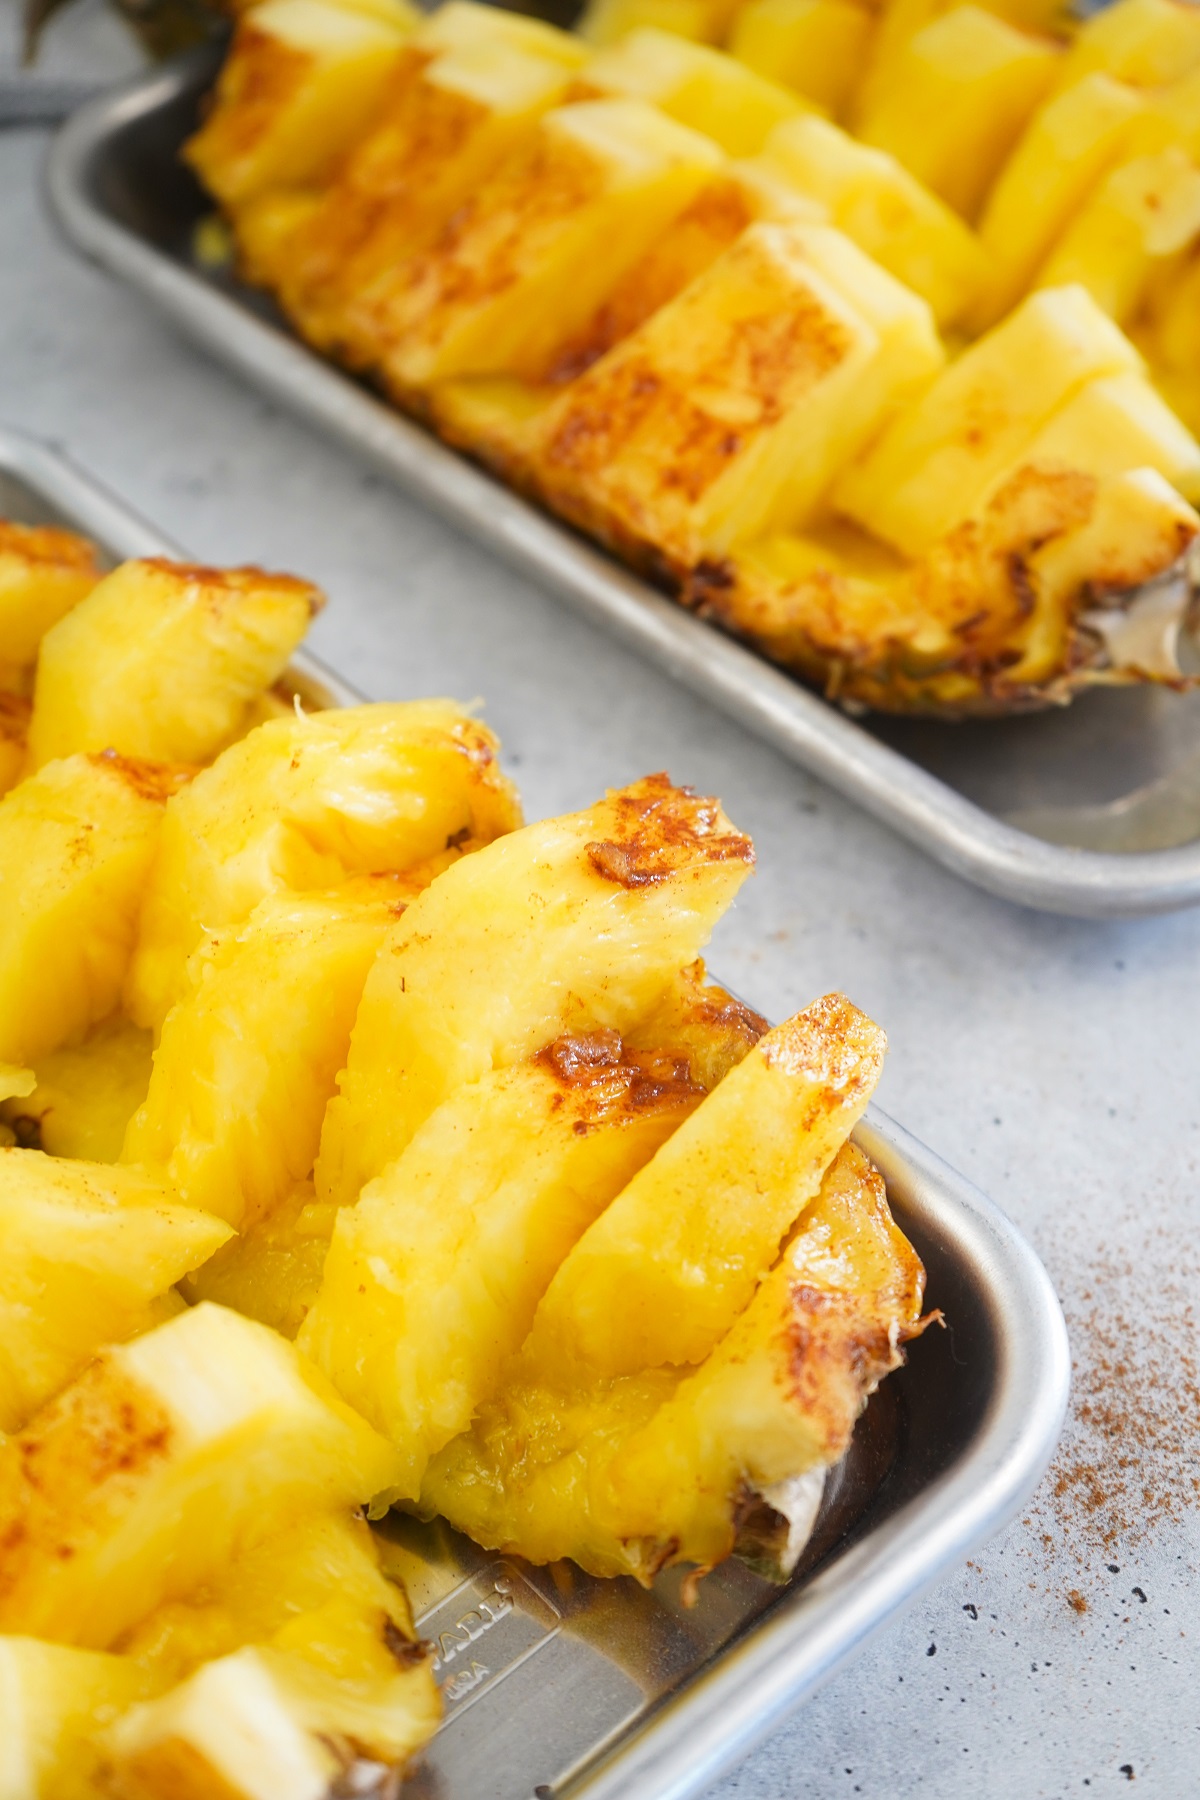 Smoked pineapple slices with cinnamon and honey on platter. 